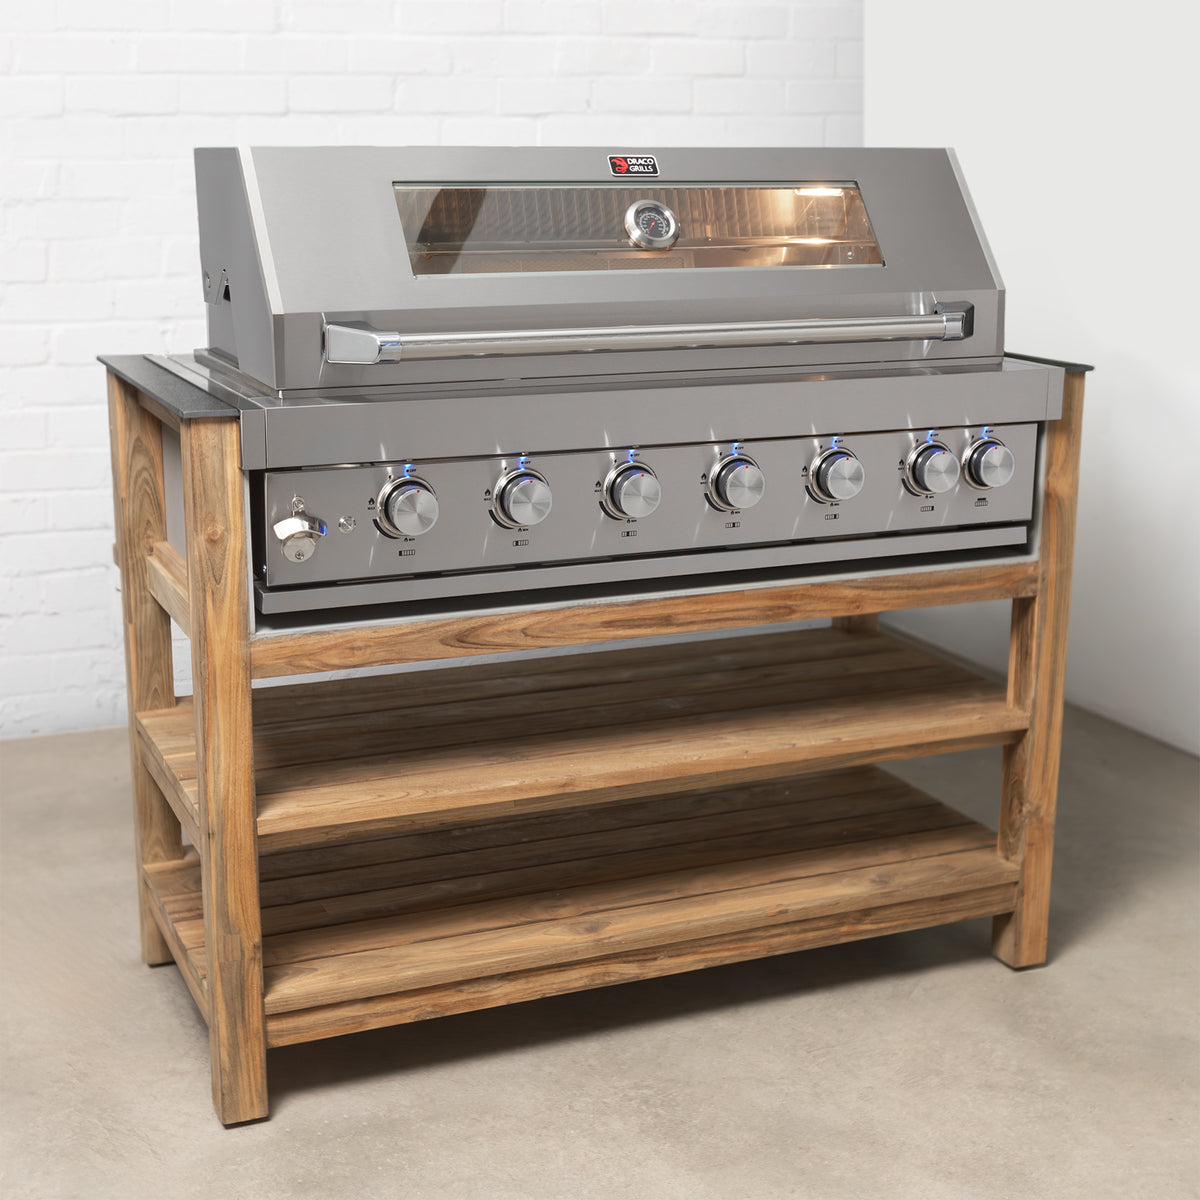 Draco Grills Teak 6 Burner Outdoor Kitchen with Modular Single &amp; Double Cupboards and Single Fridge